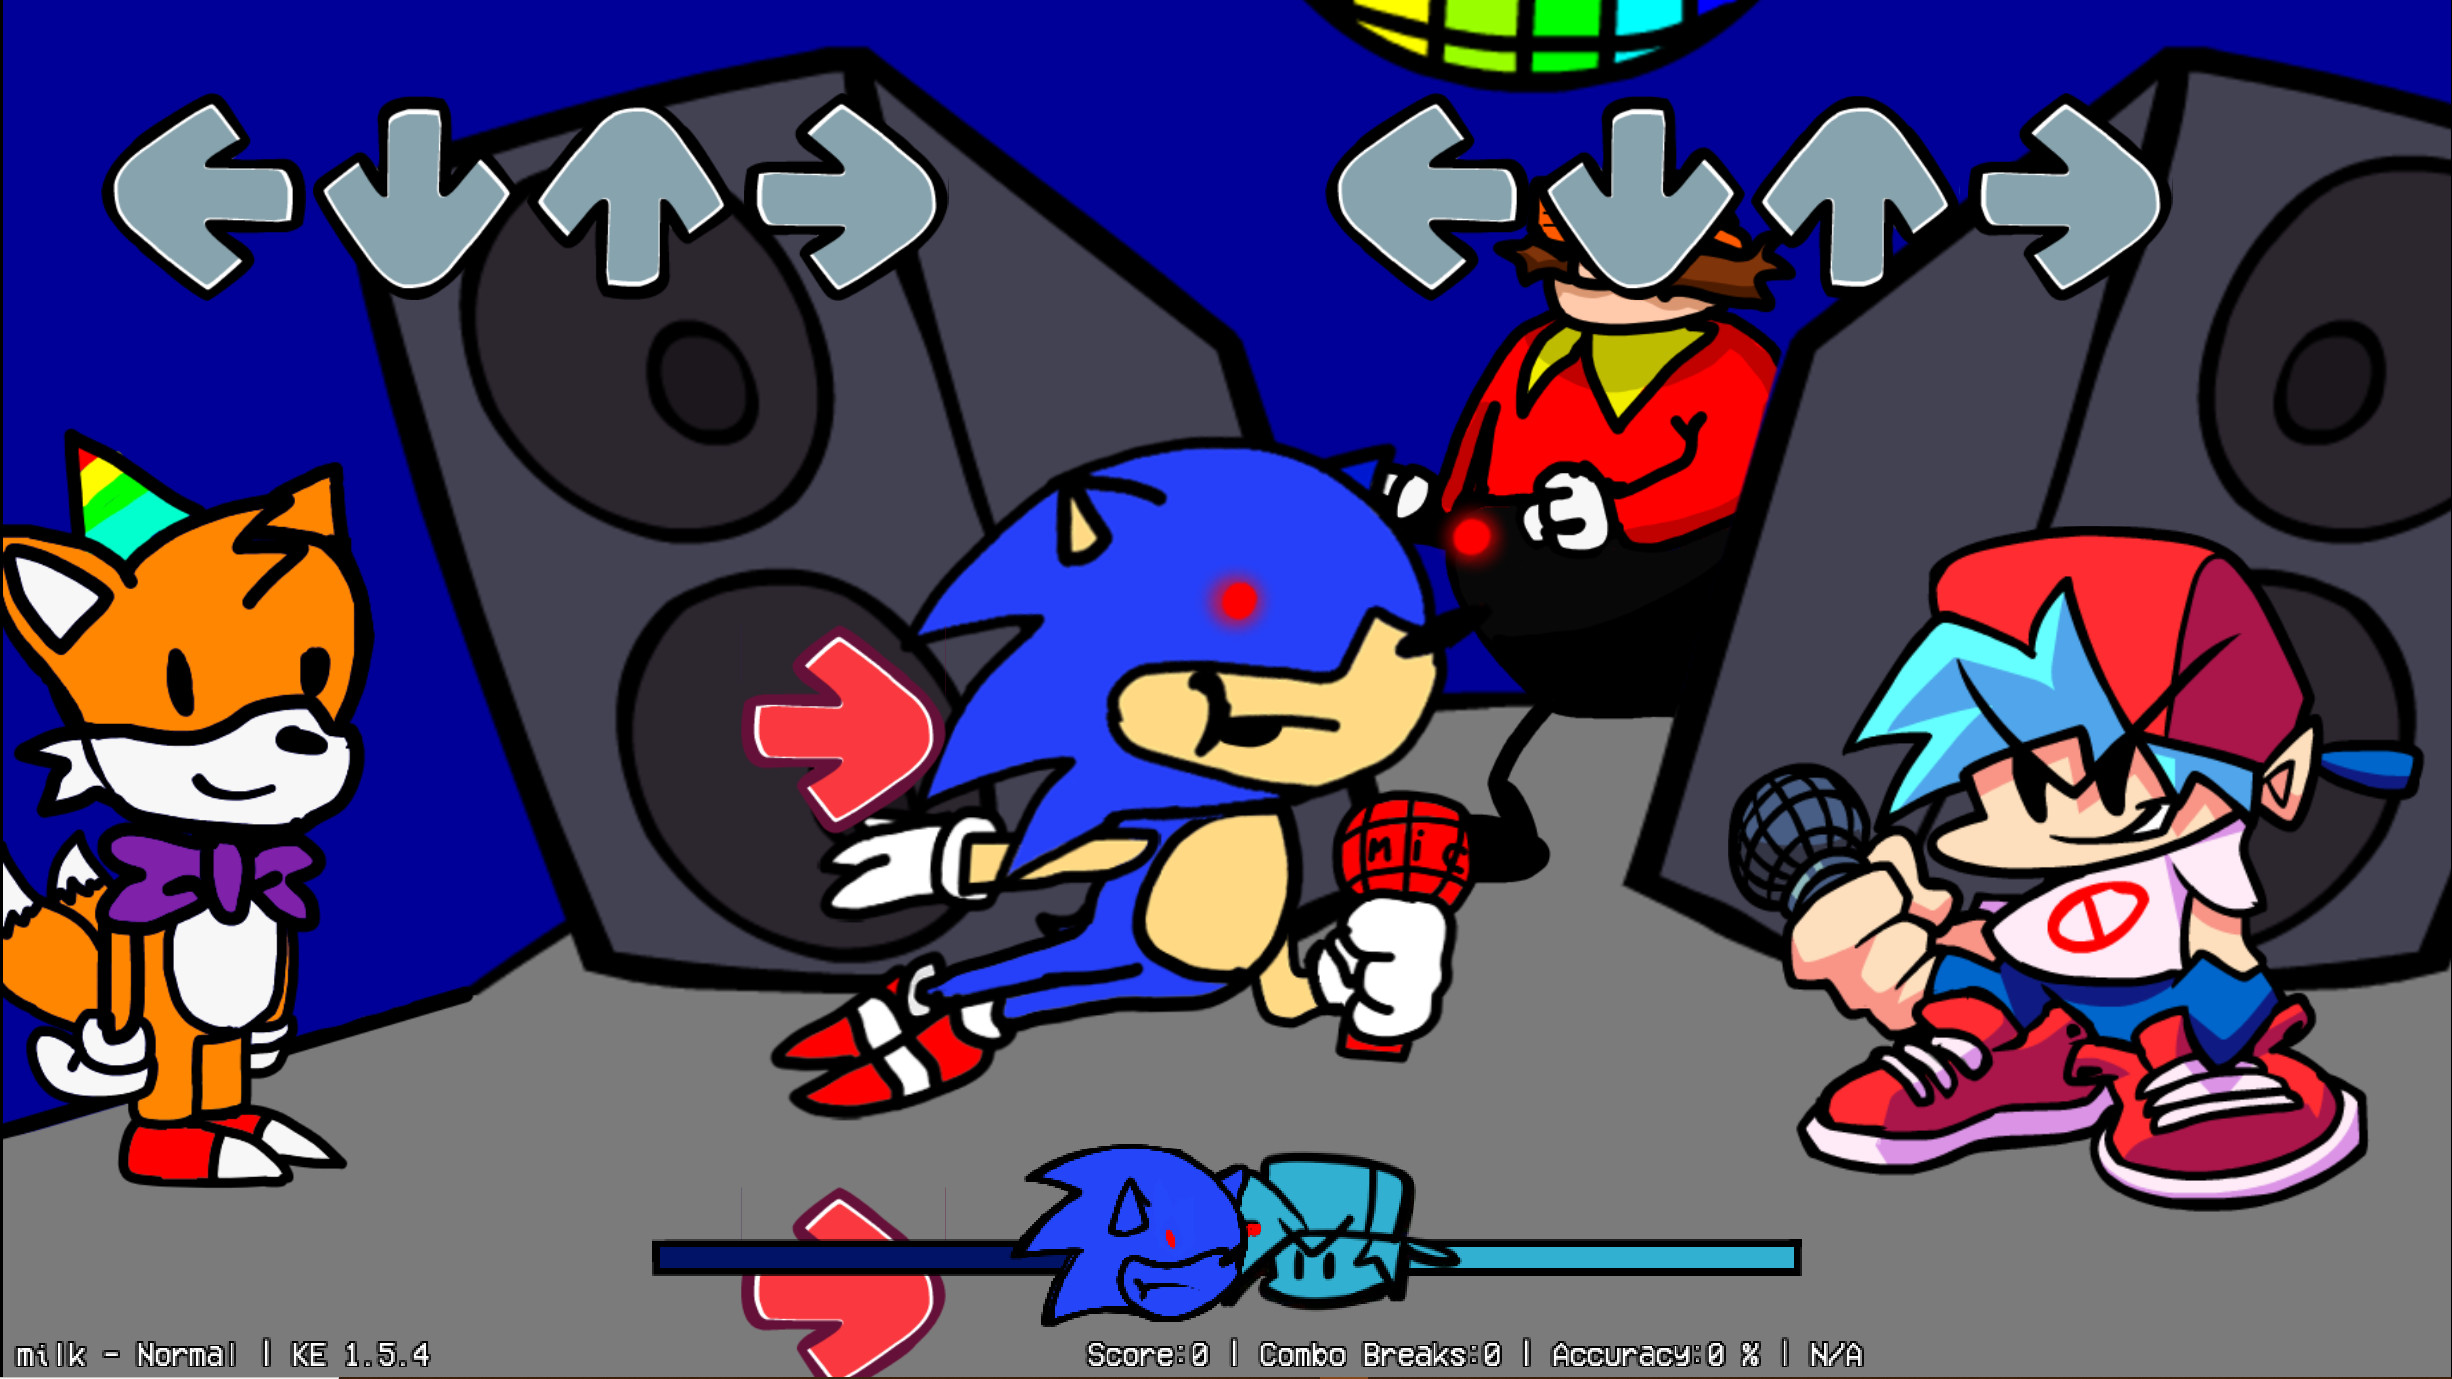 fnf faker sonic.exe and new lord X playable [Friday Night Funkin'] [Mods]